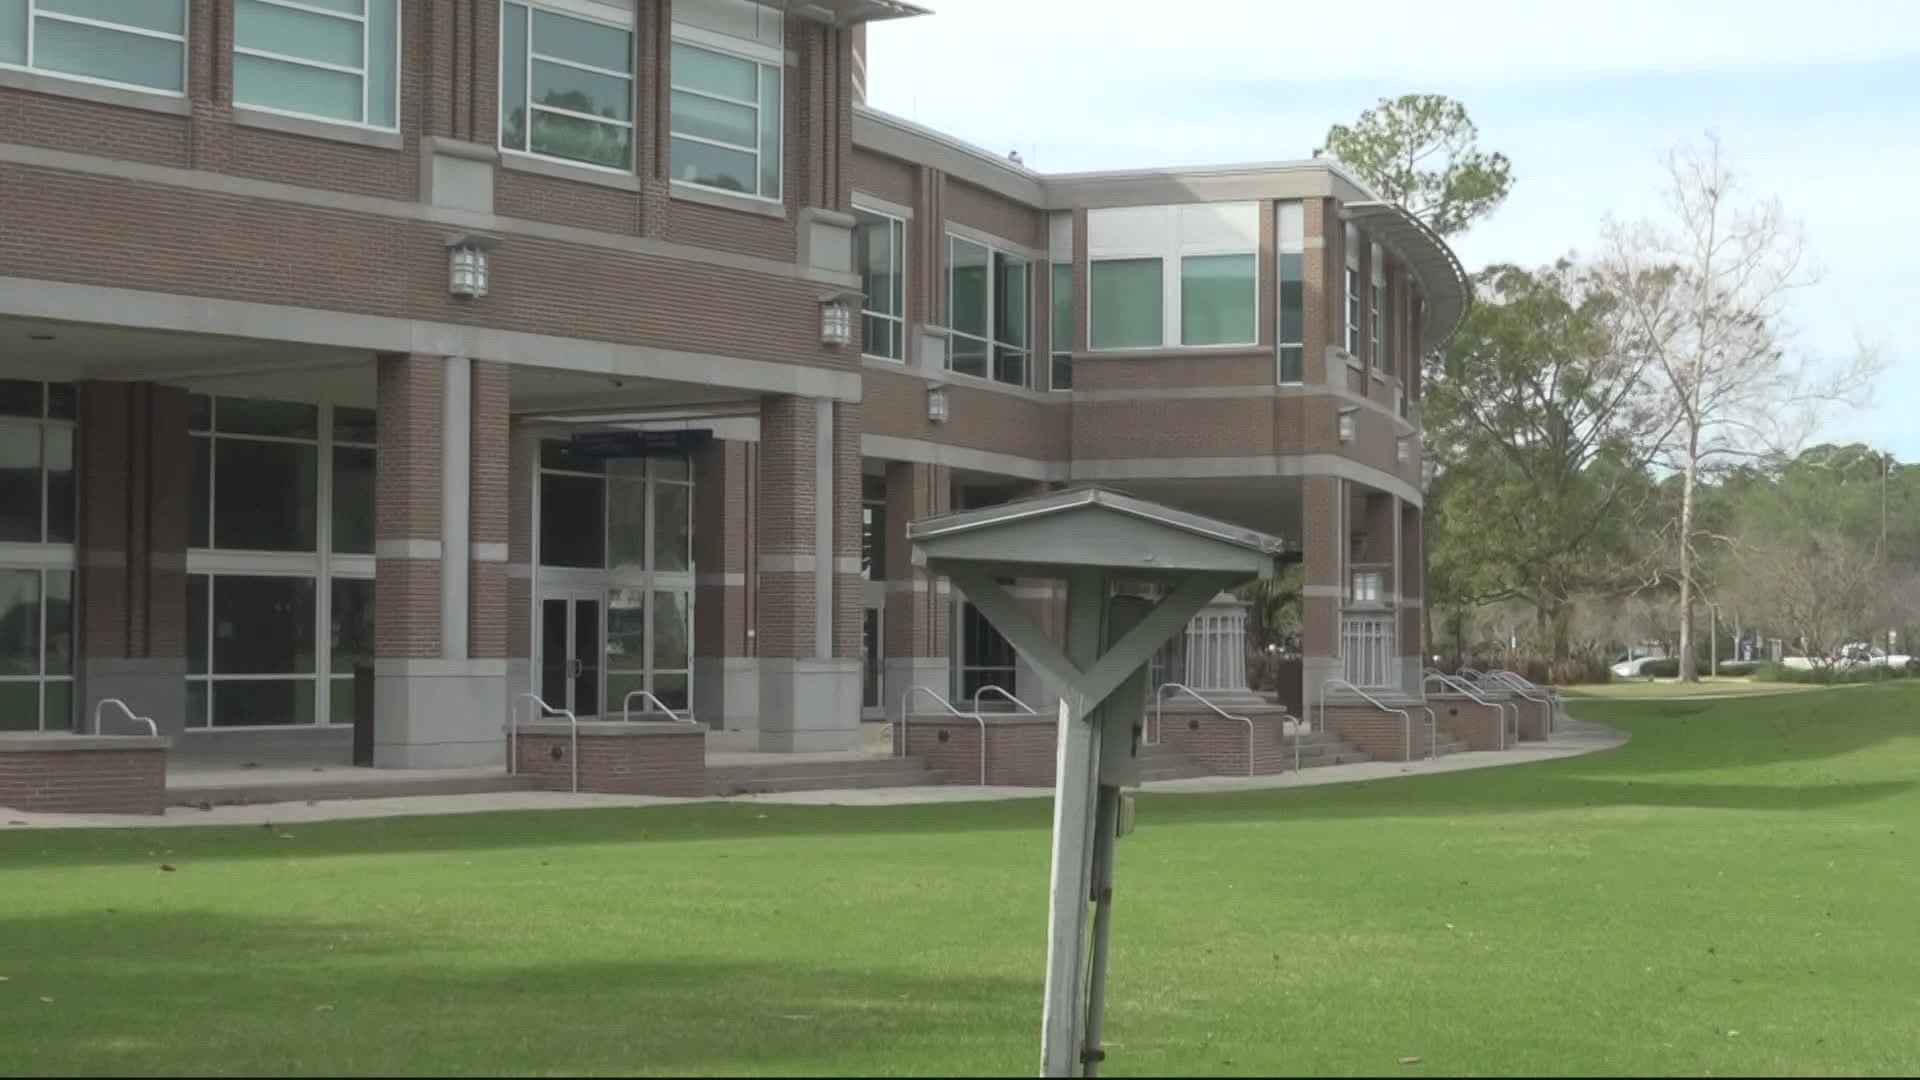 ABC News reports that public institutions are required to describe which programs and campus-related activities are connected to CRT and how much it costs.